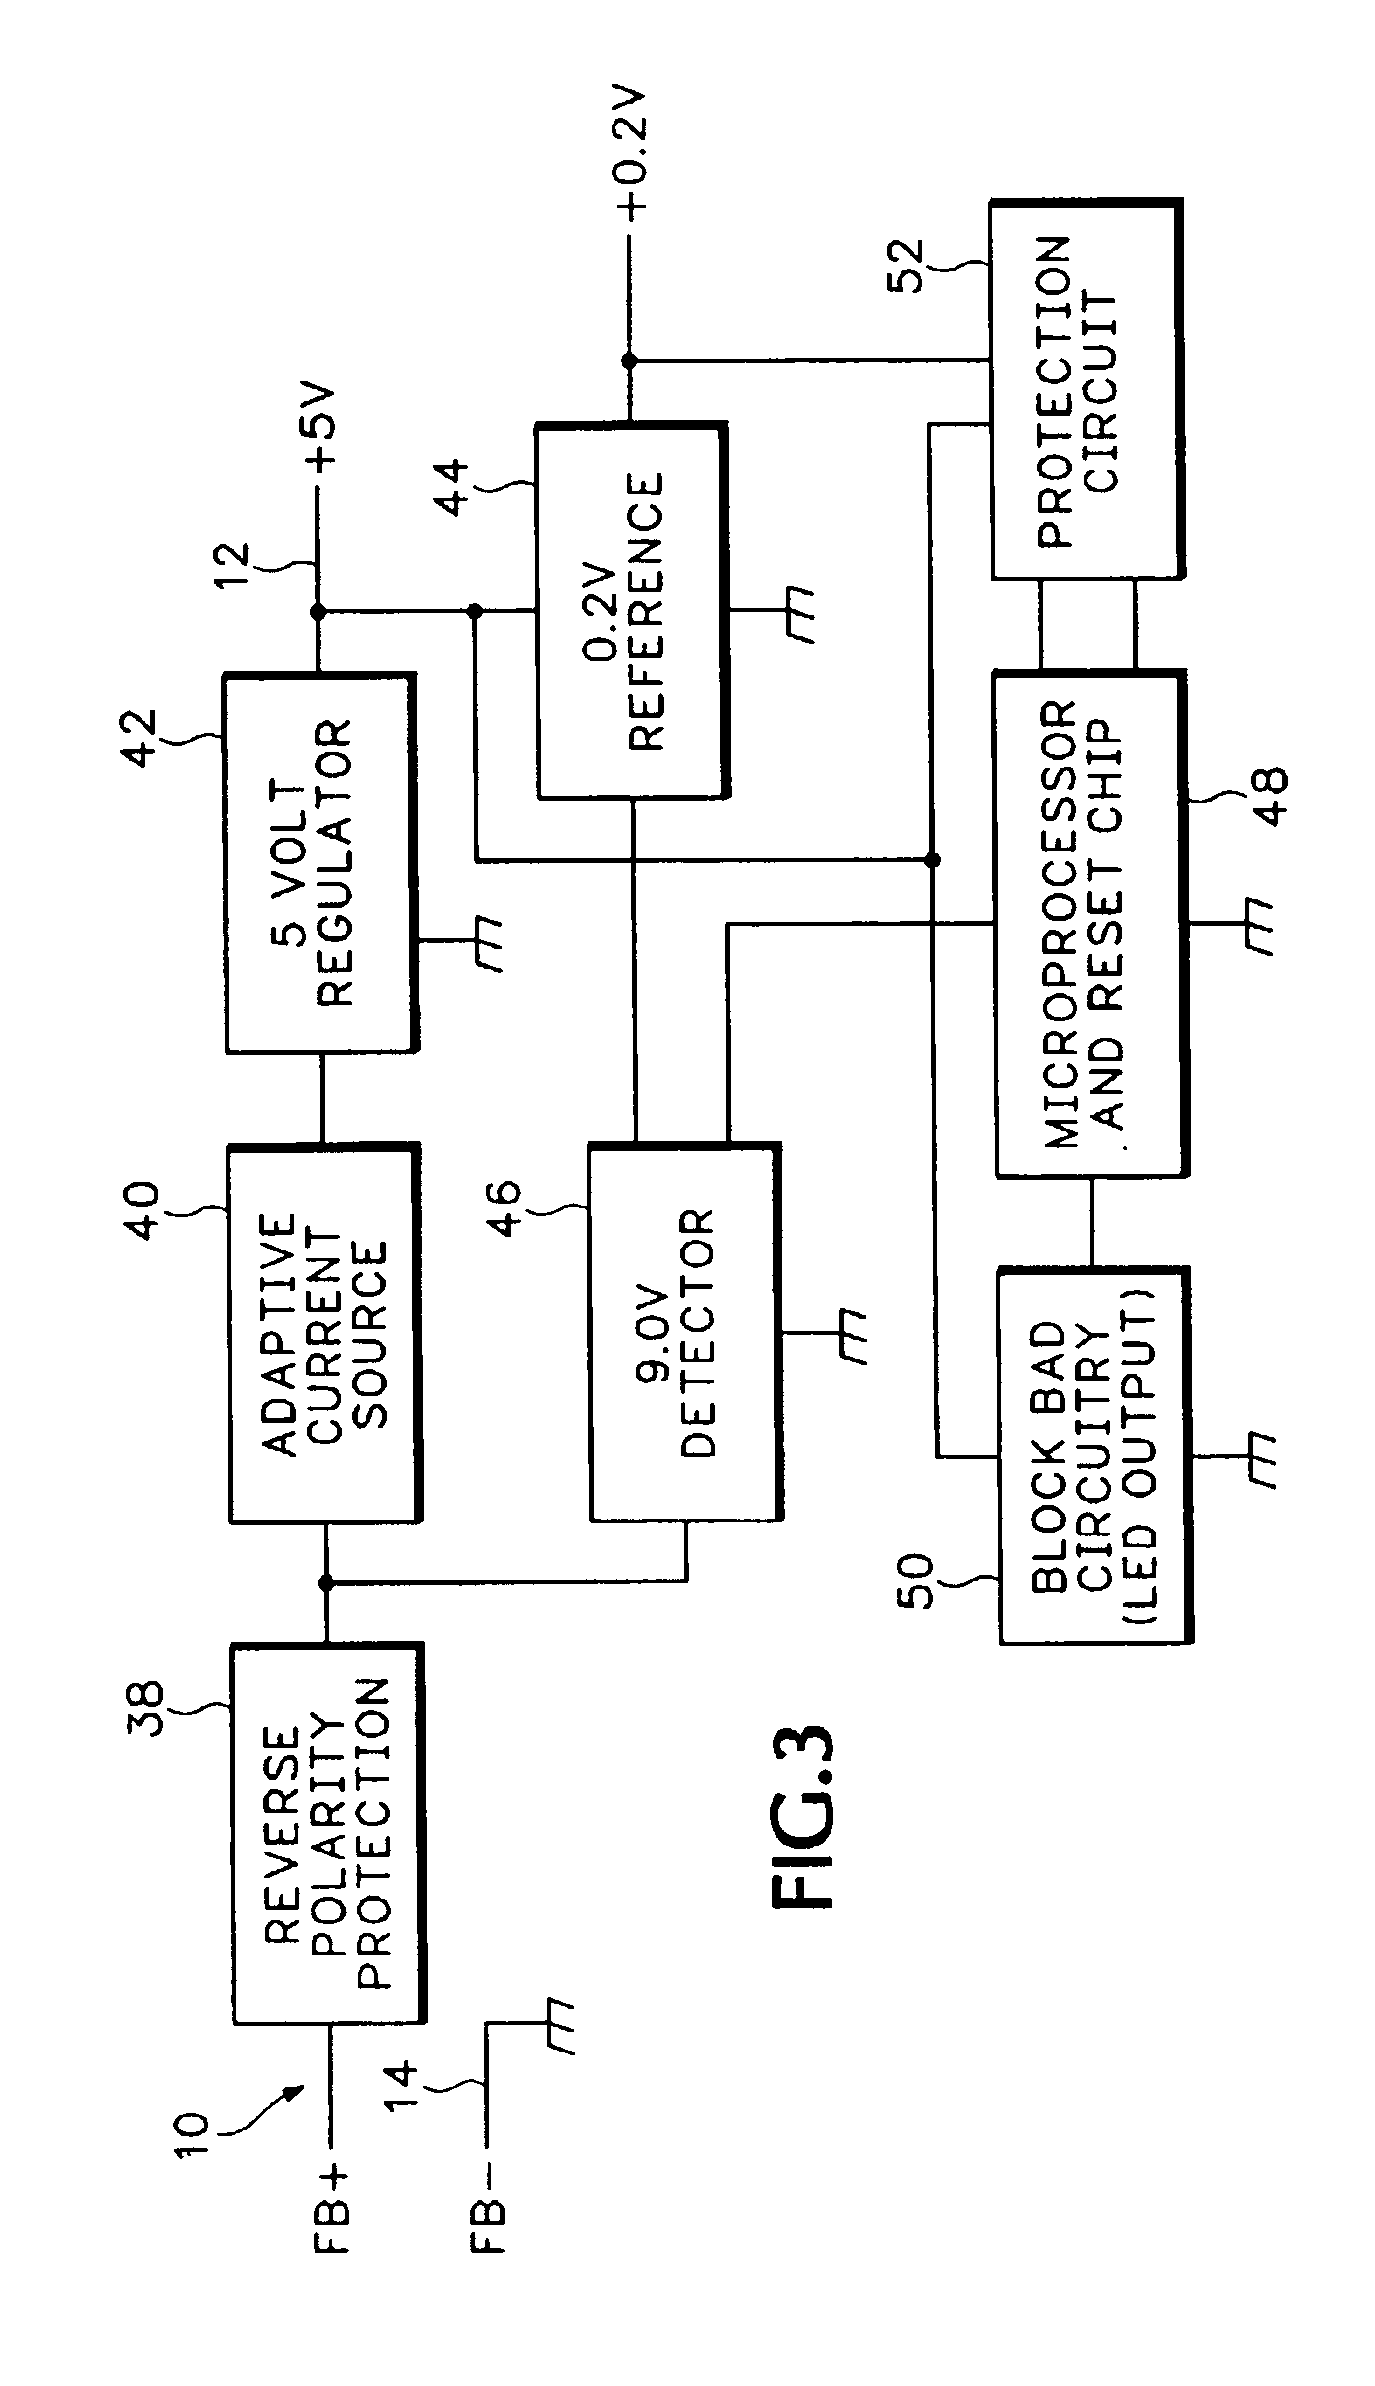 Enhanced spur cable circuit protection device and method for its implementation